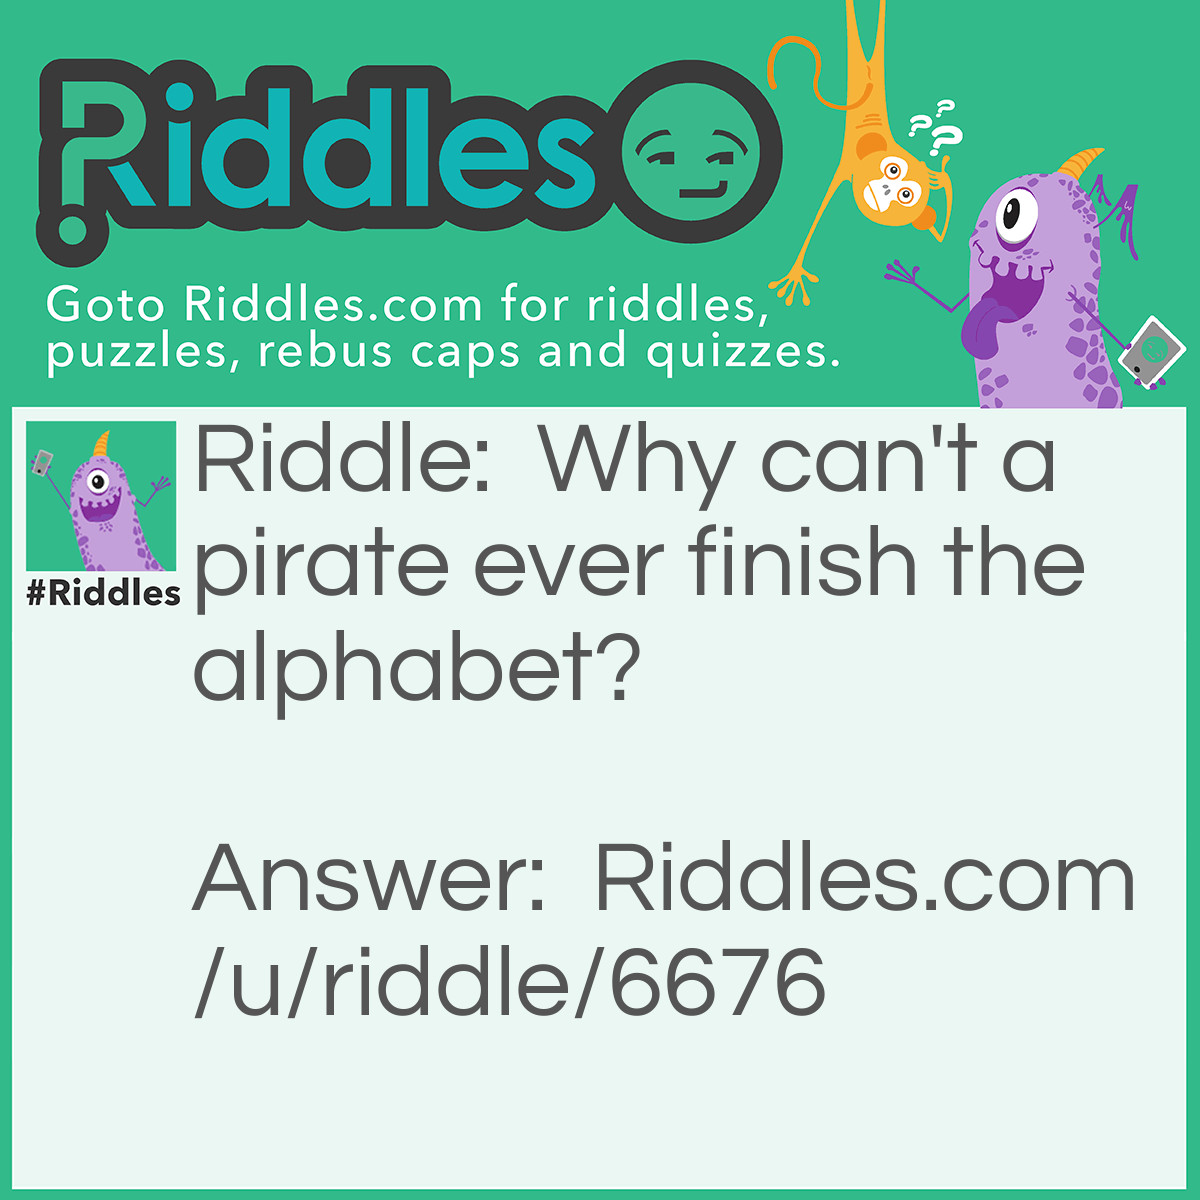 Riddle: Why can't a pirate ever finish the alphabet? Answer: Because he always gets lost at sea!